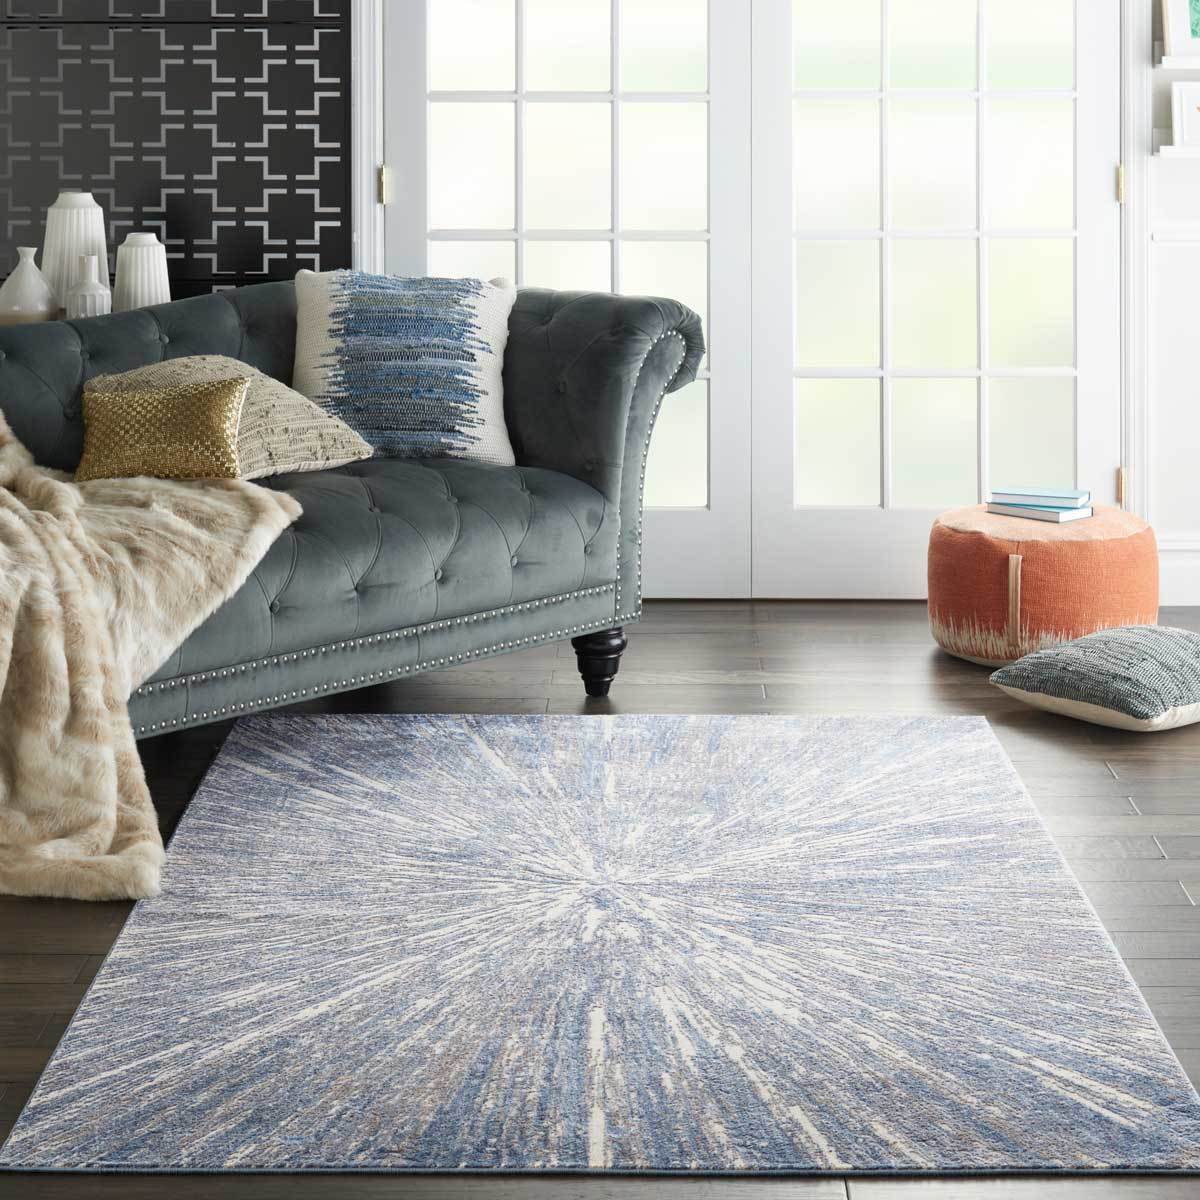 Lifestyle image of rug in furnished living space